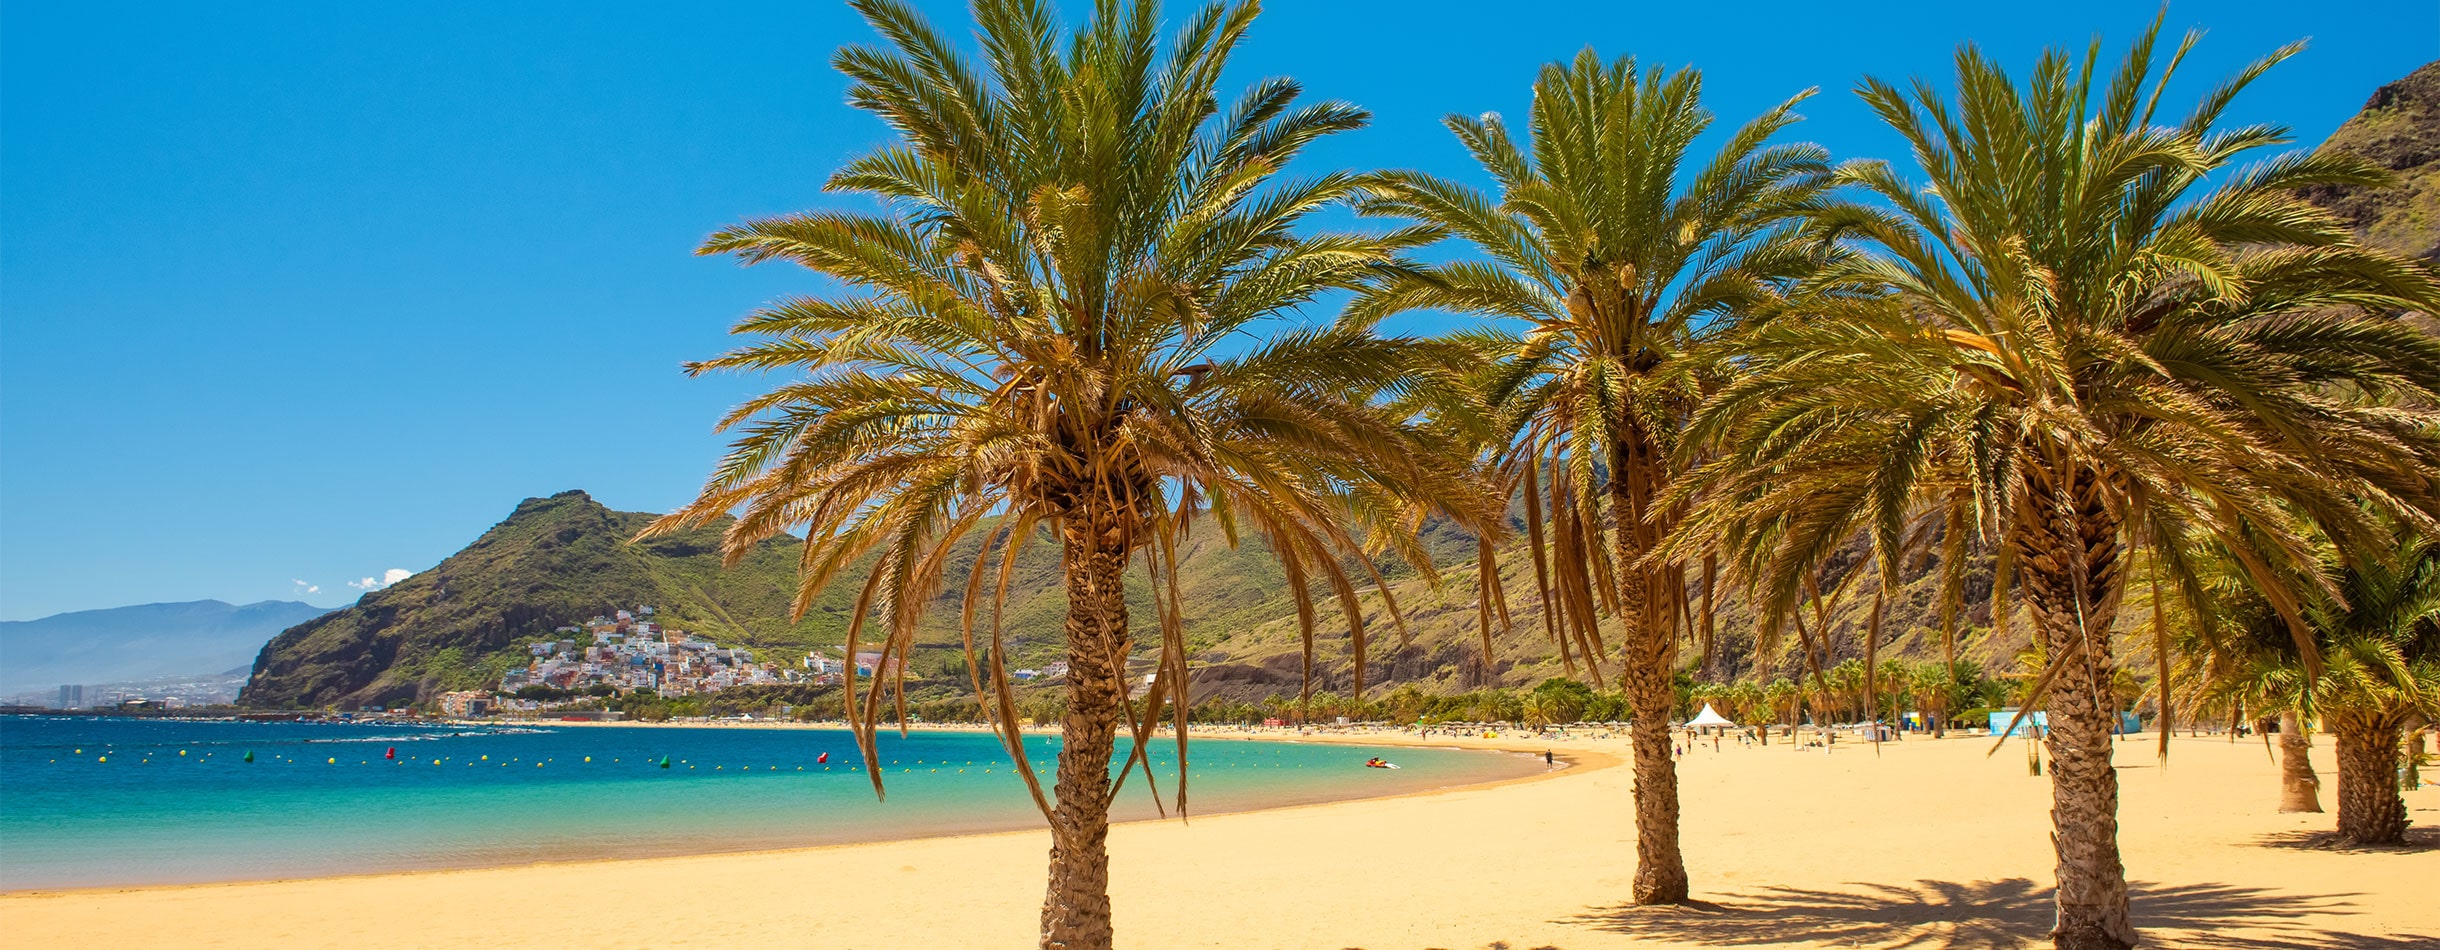 Beautiful beach with palm trees, Canary Islands